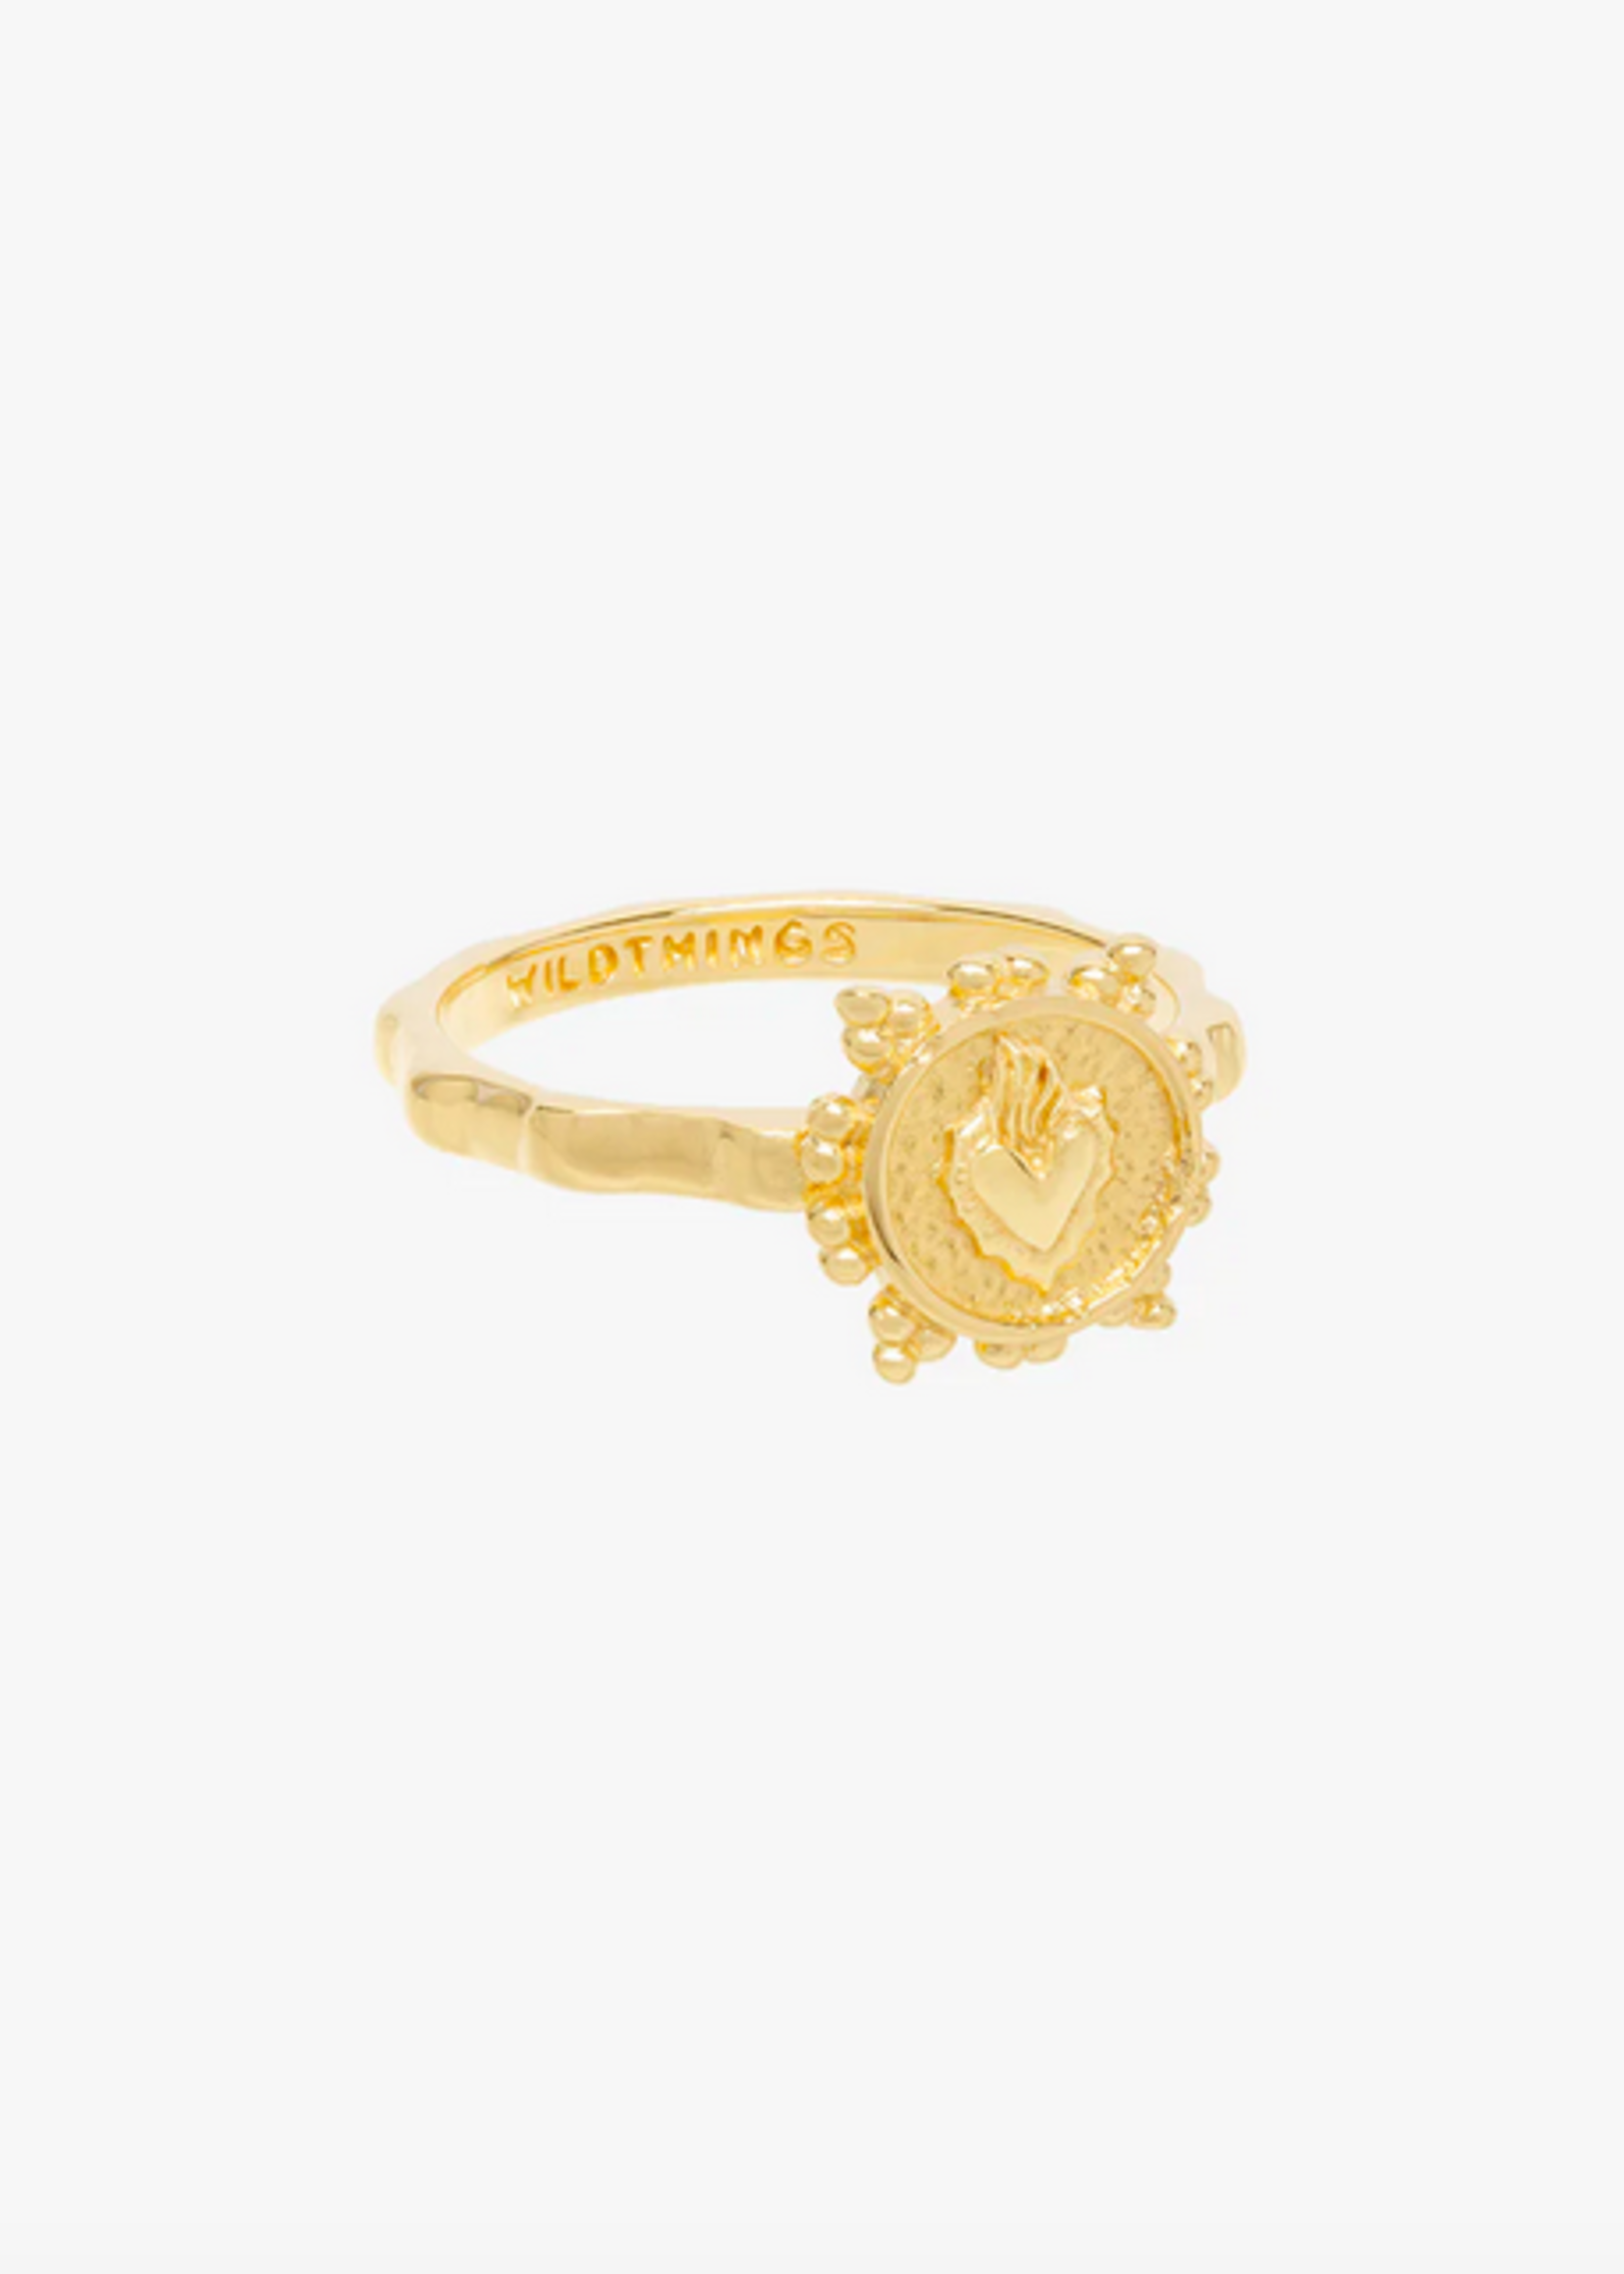 Wildthings Collectables Flaming heart ring gold plated (size 54)